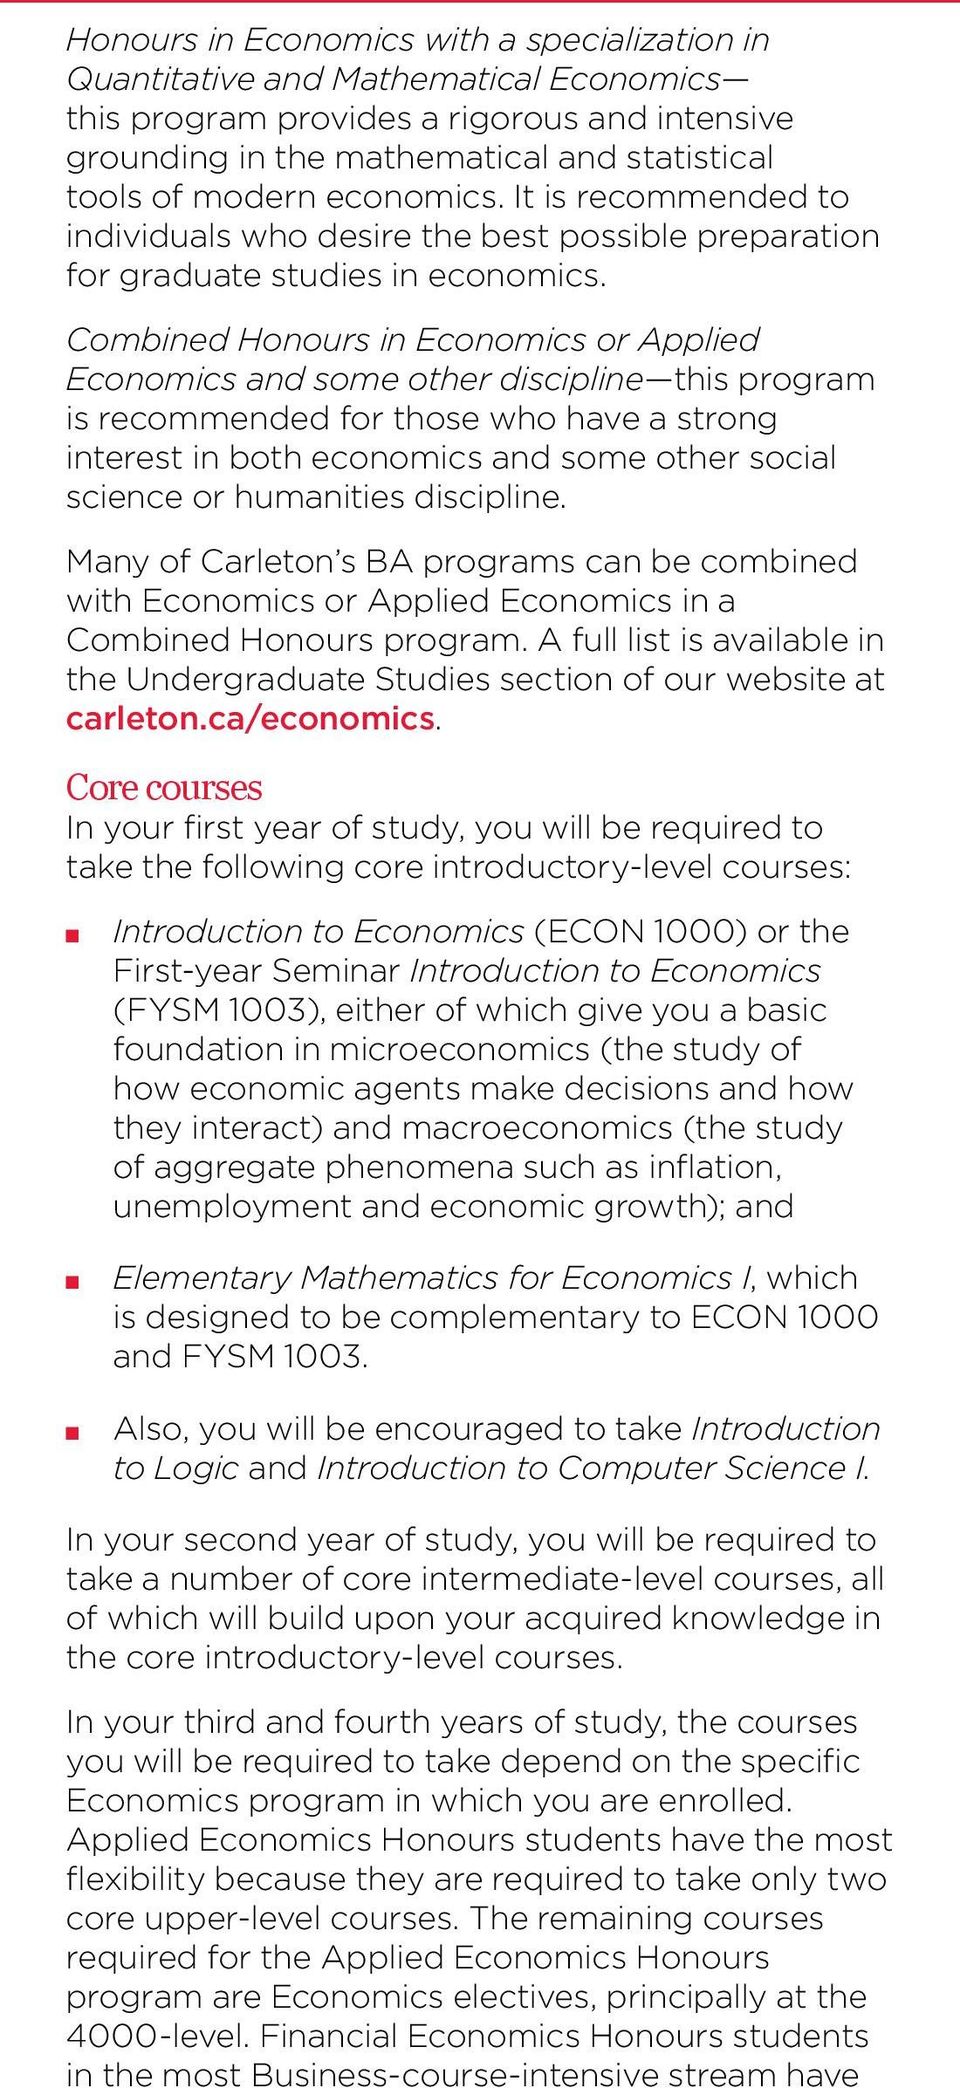 Combined Honours in Economics or Applied Economics and some other discipline this program is recommended for those who have a strong interest in both economics and some other social science or